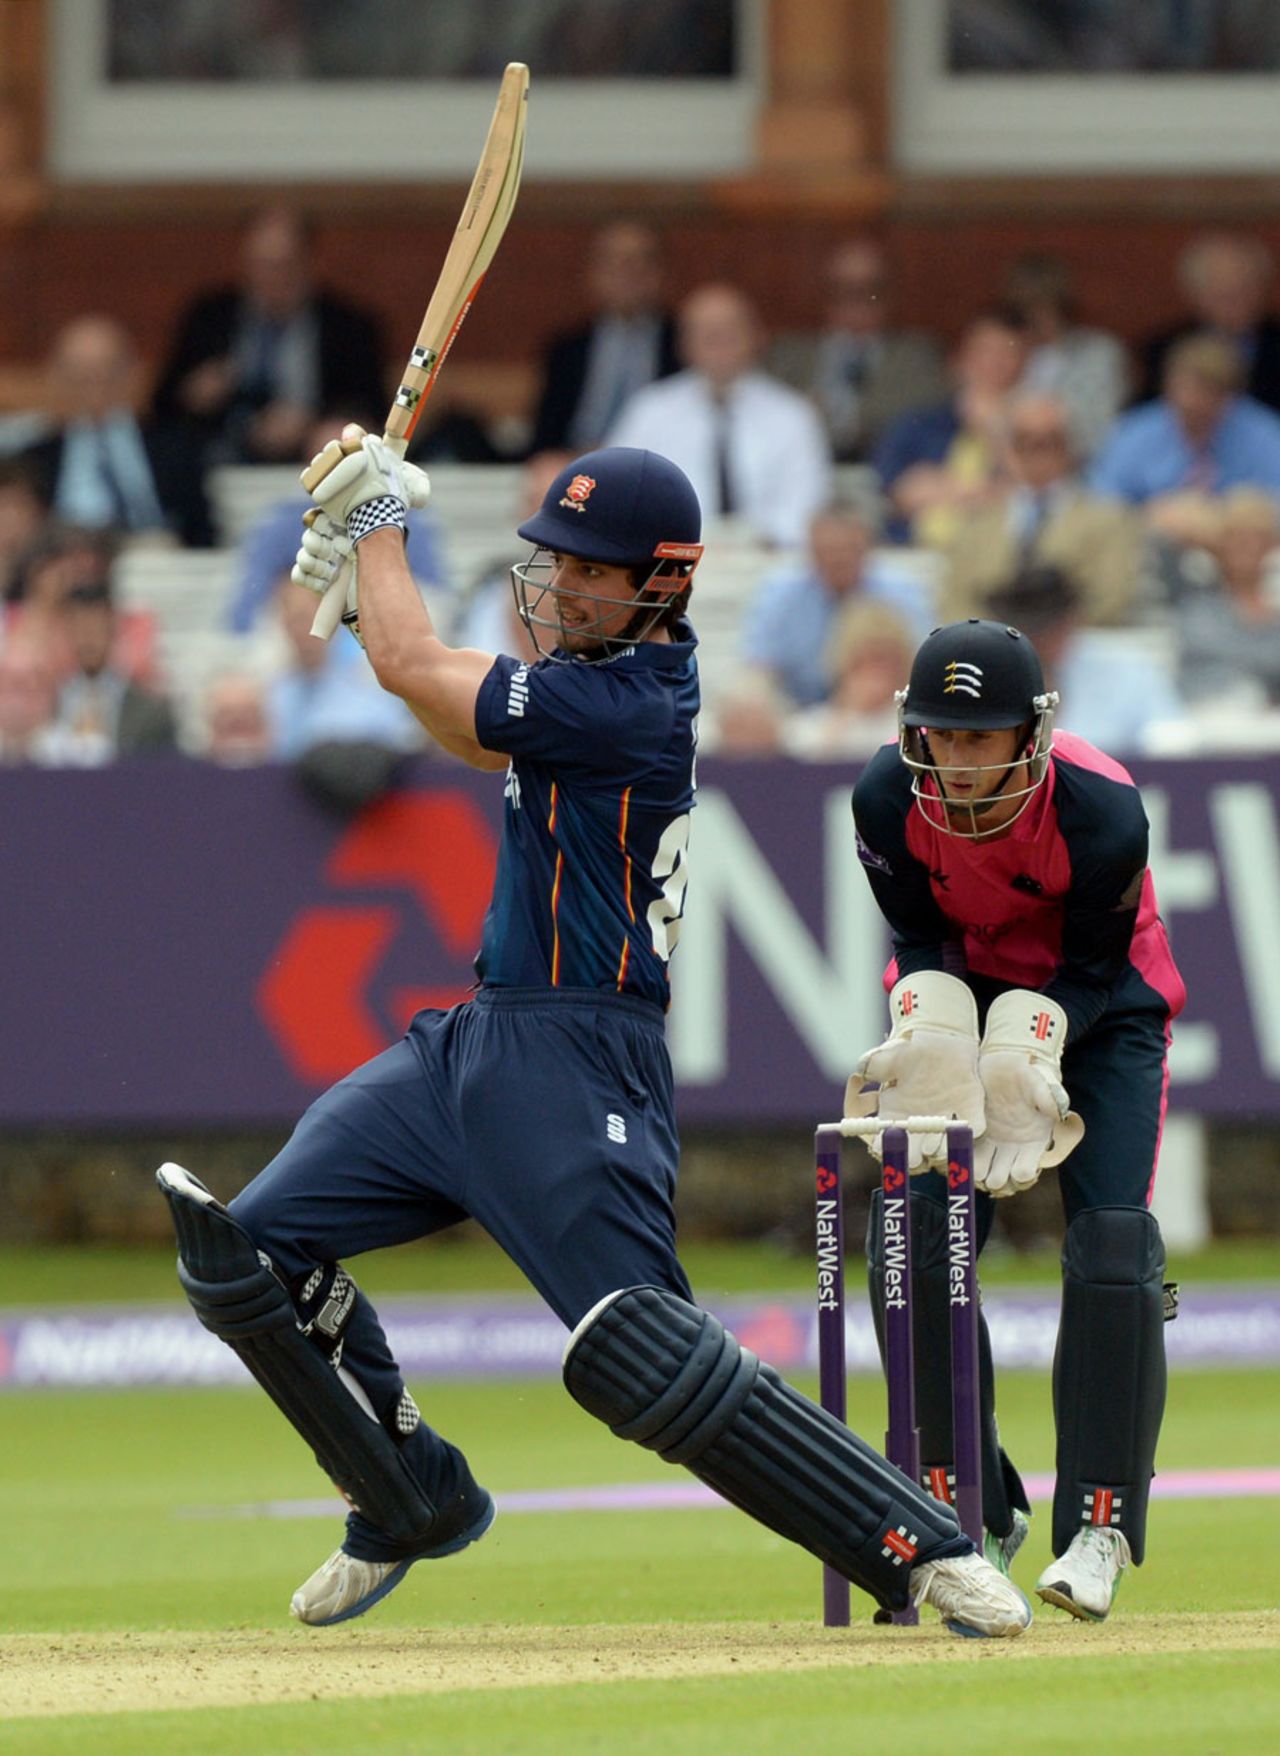 Alastair Cook targets the leg side, May 17, 2014